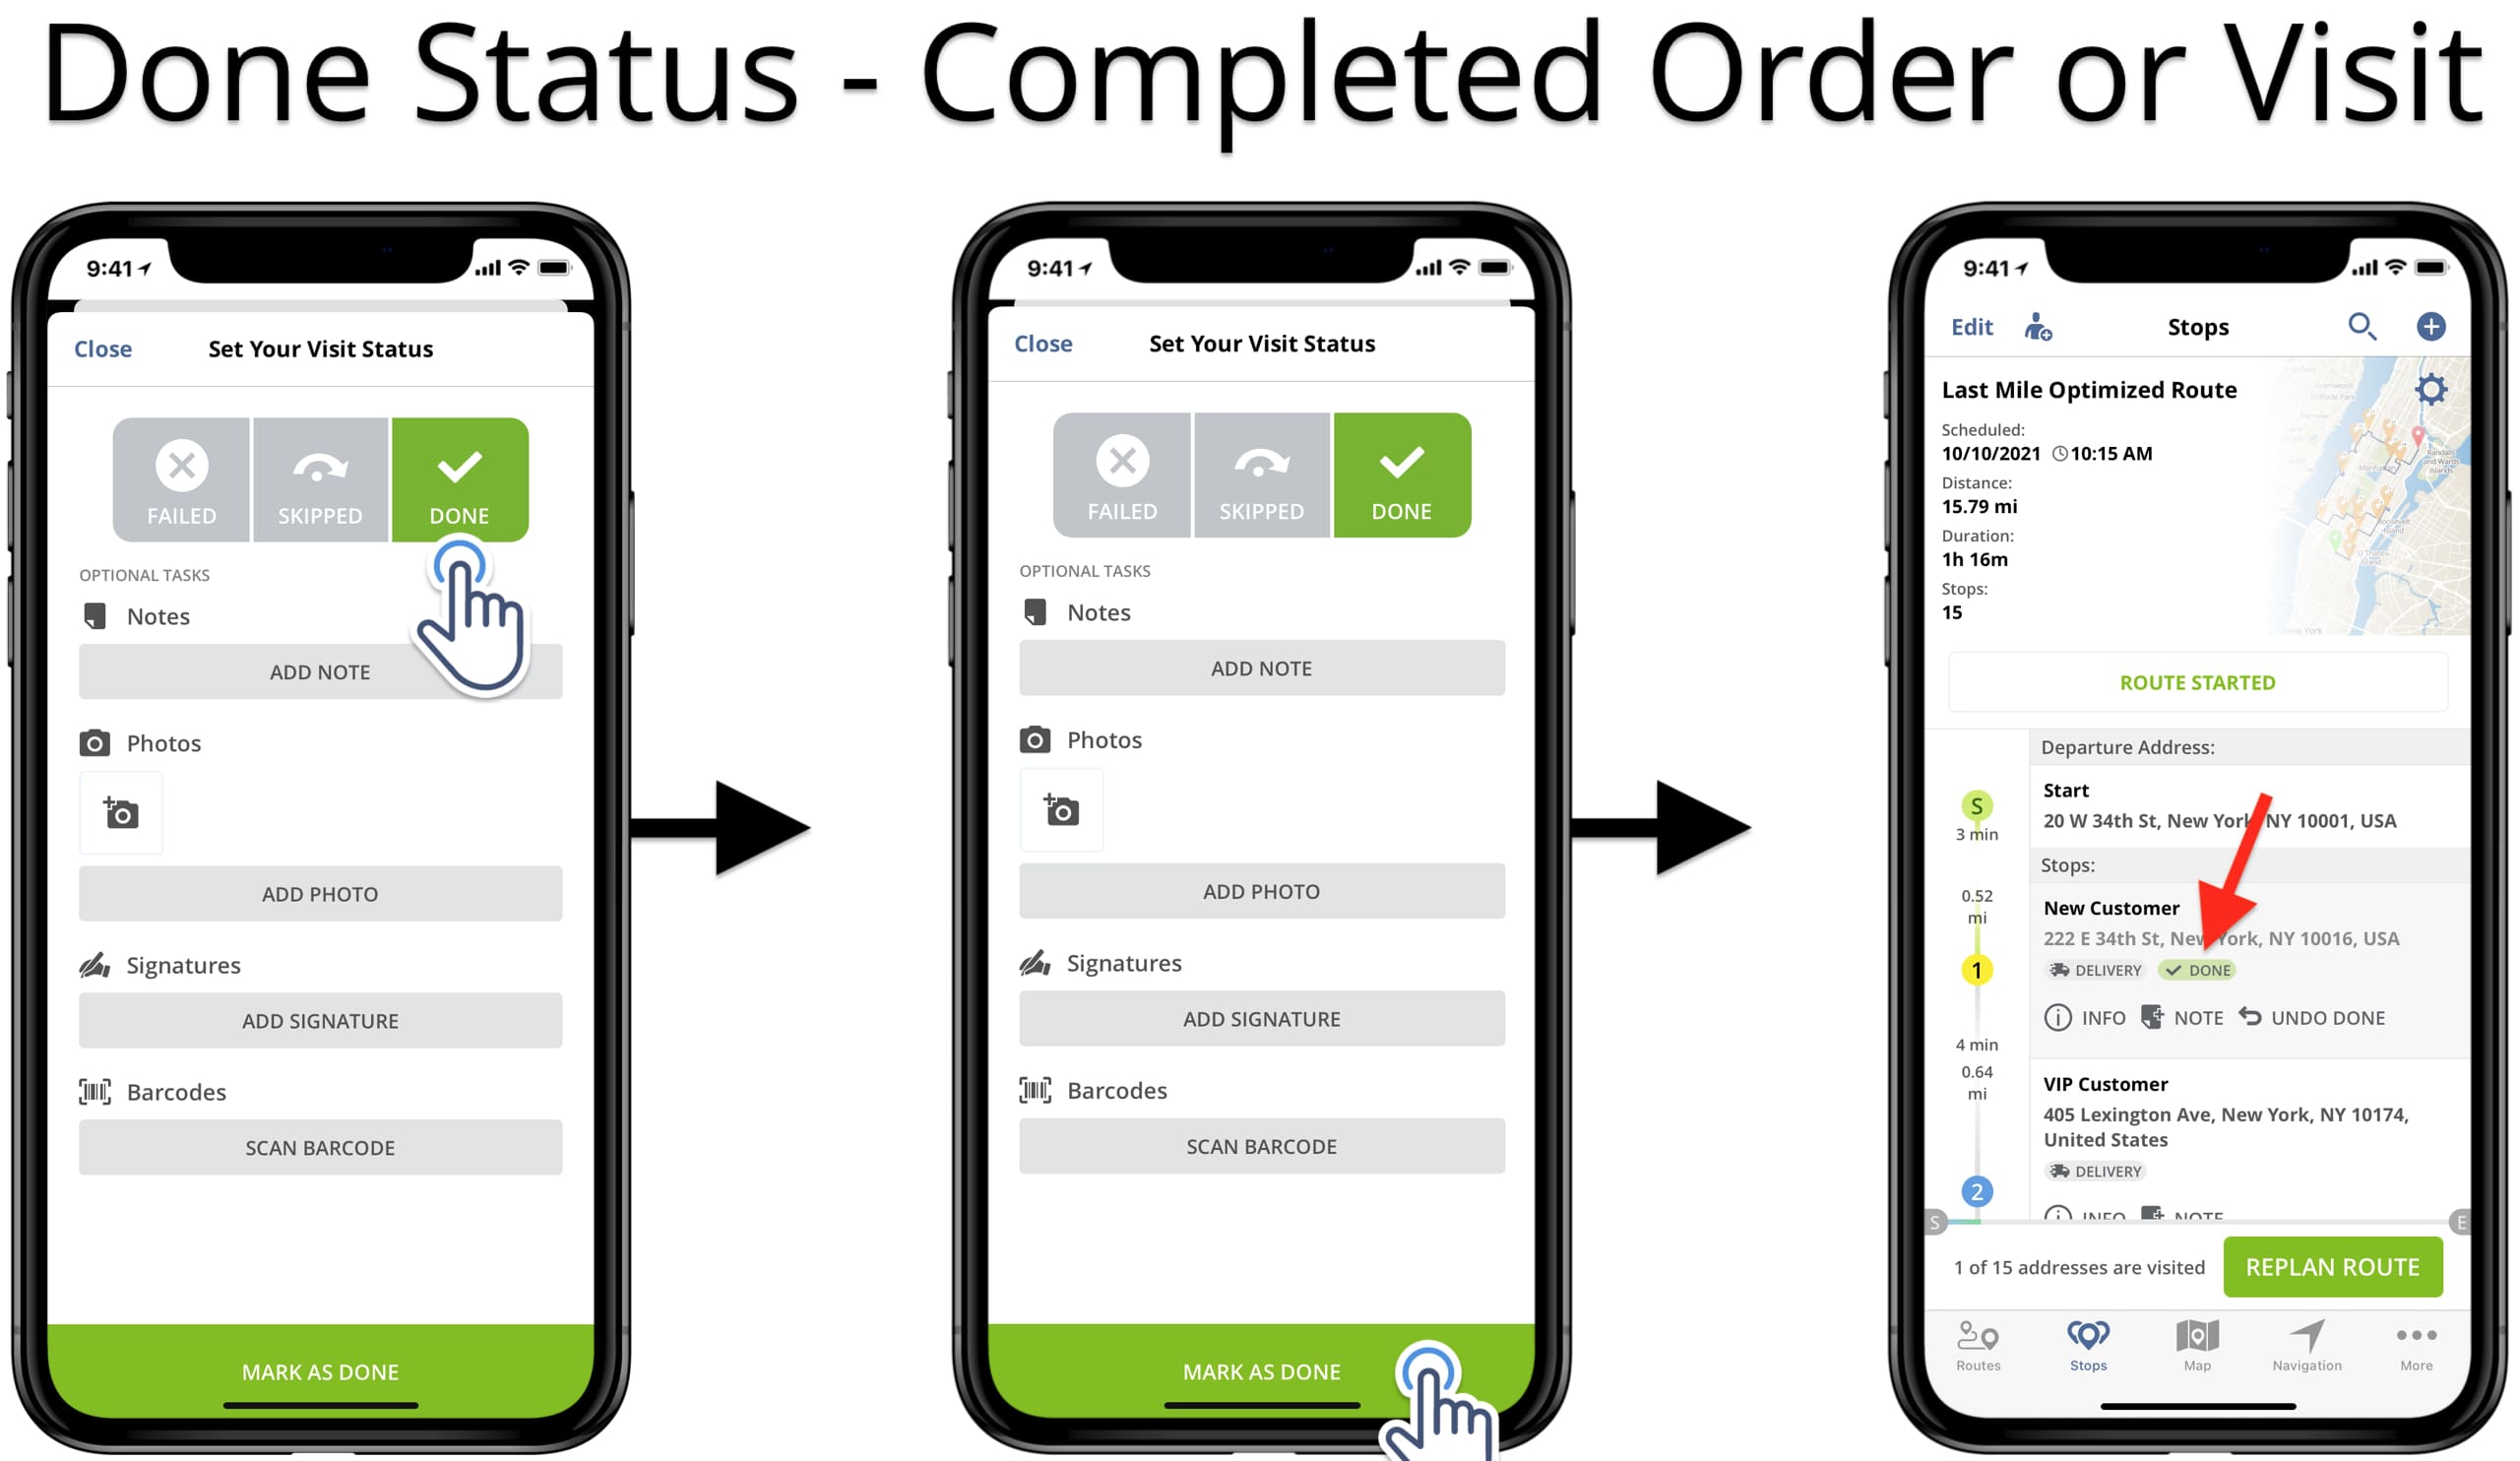 Add Done status to fulfilled orders and completed visits and deliveries on iOS route planner.